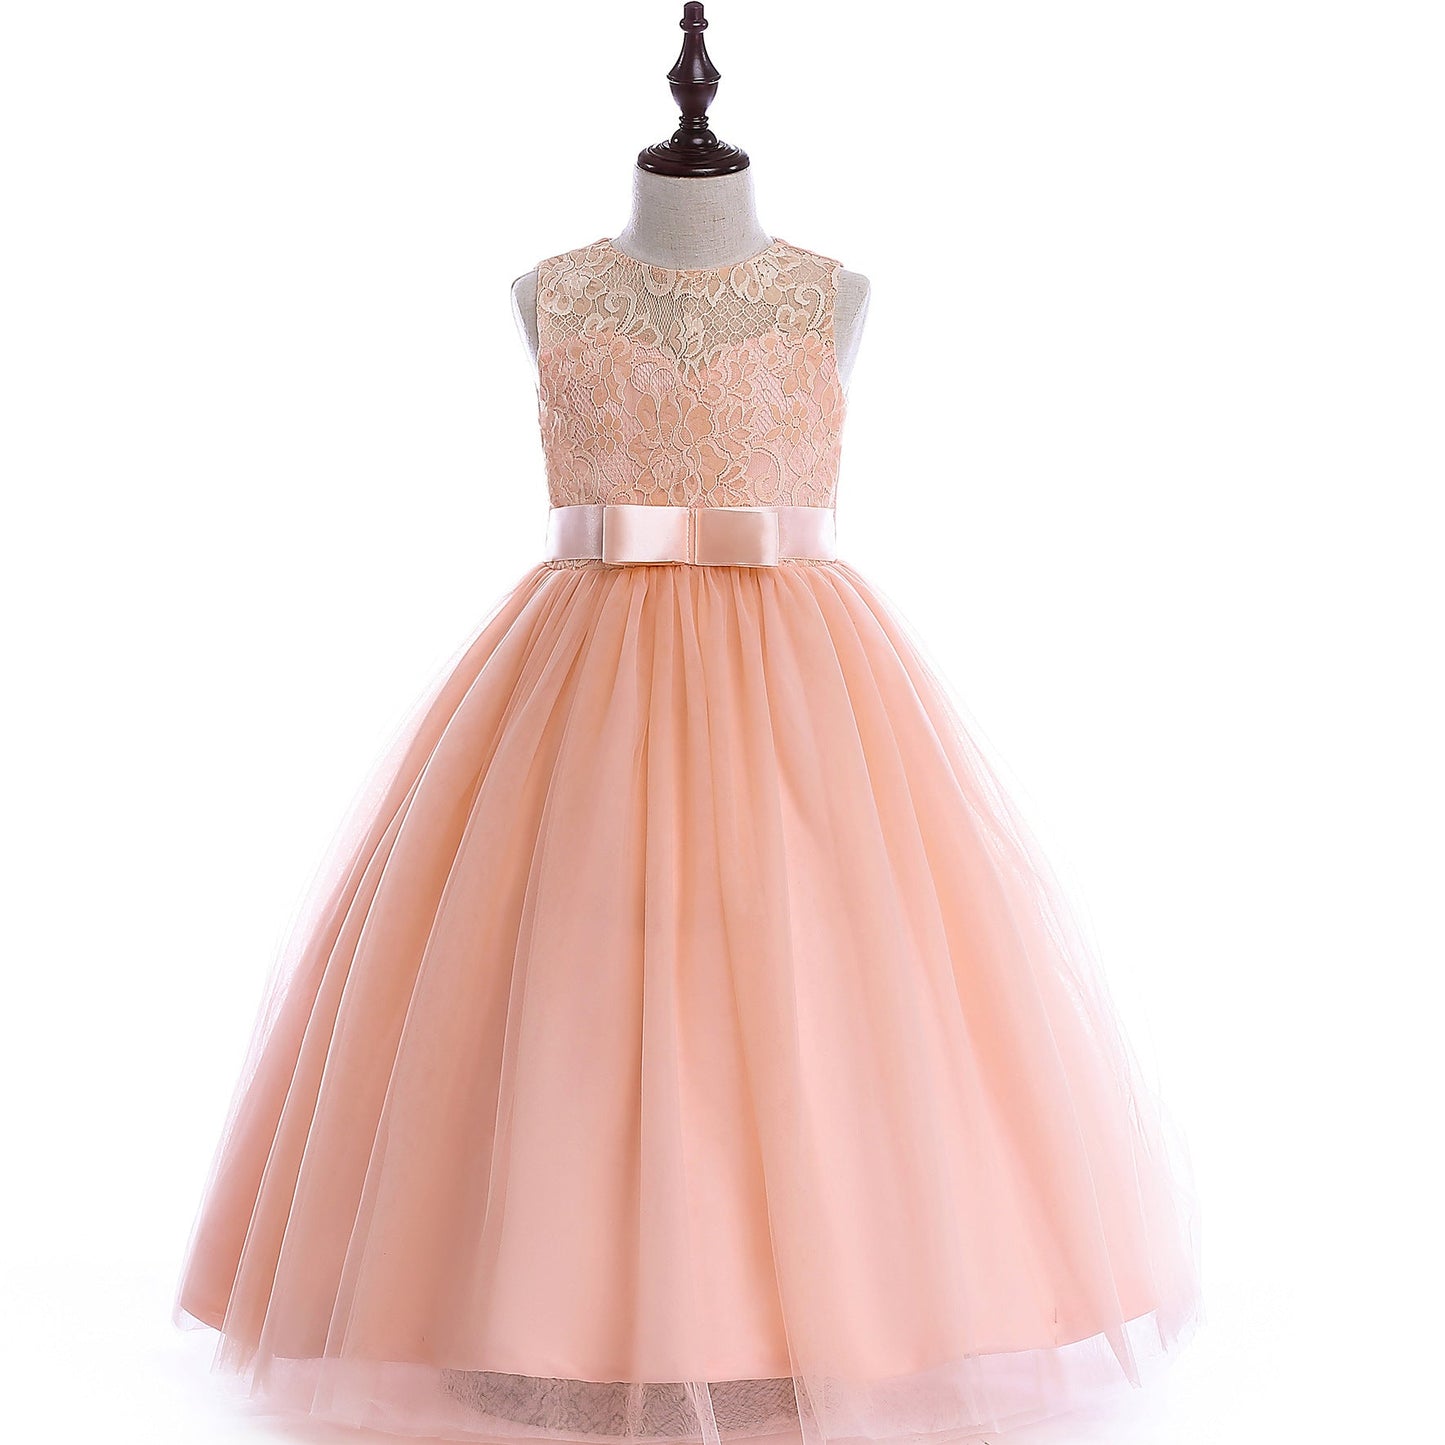 Girls special occasion dress - Adorable Attire